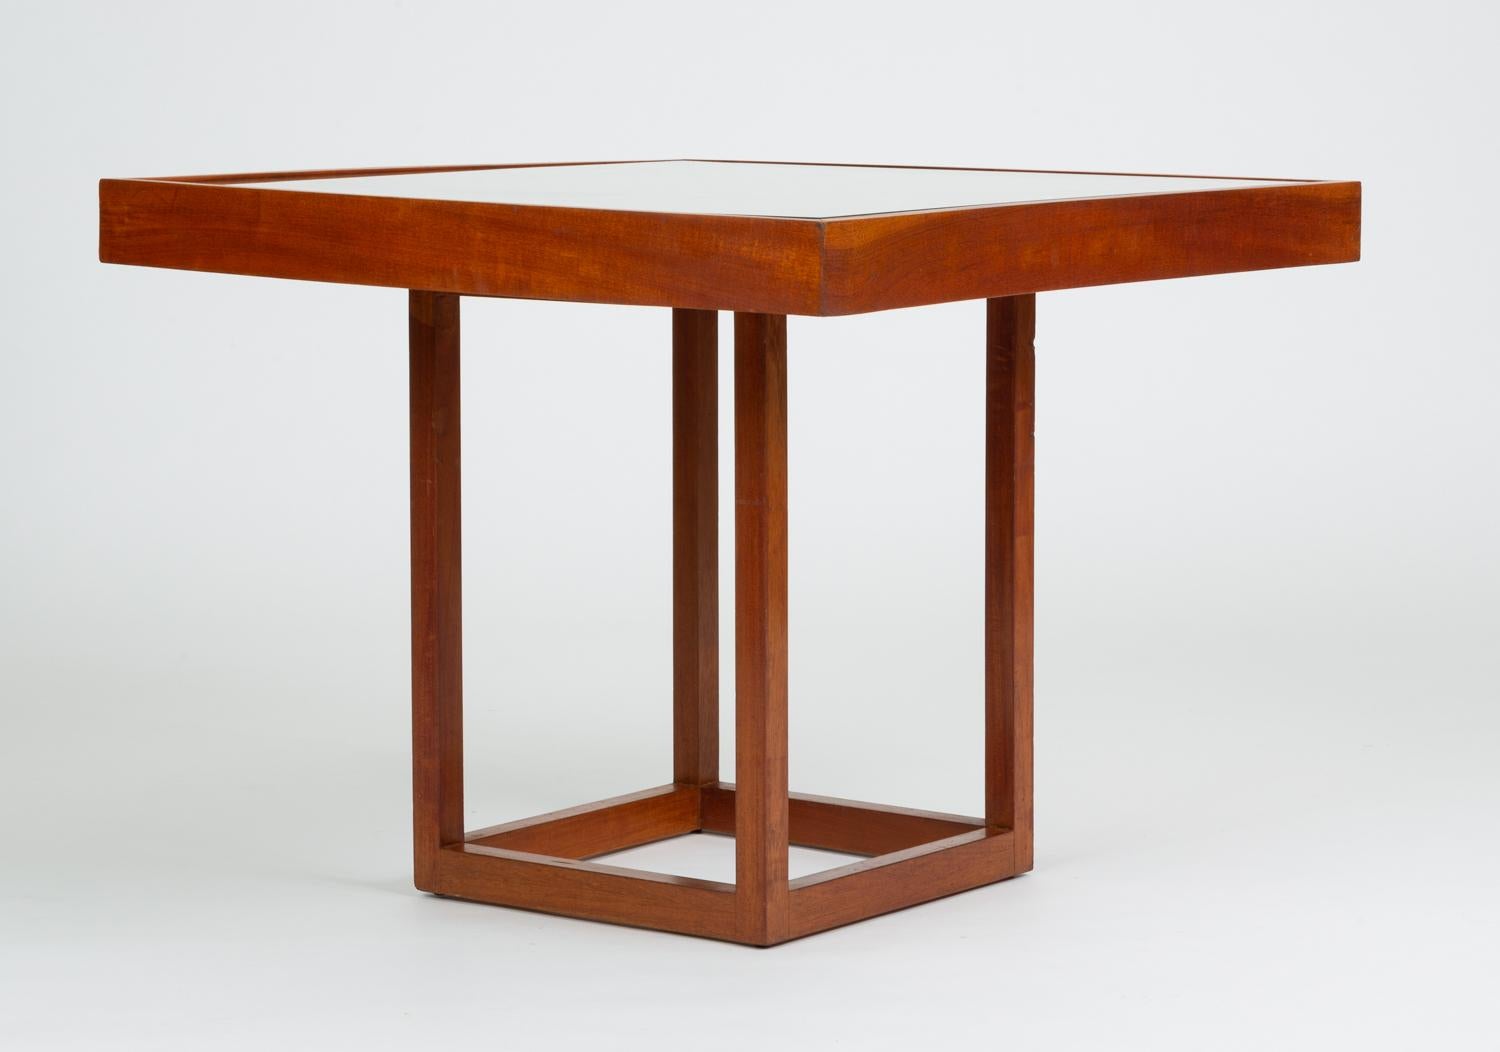 Bauhaus-trained, Mexico City-based Michael van Beuren created highly functional modern design inspired by Mexican vernacular styles and materials. This example is a convertible table with a teak frame and and irregular shape with concave and convex